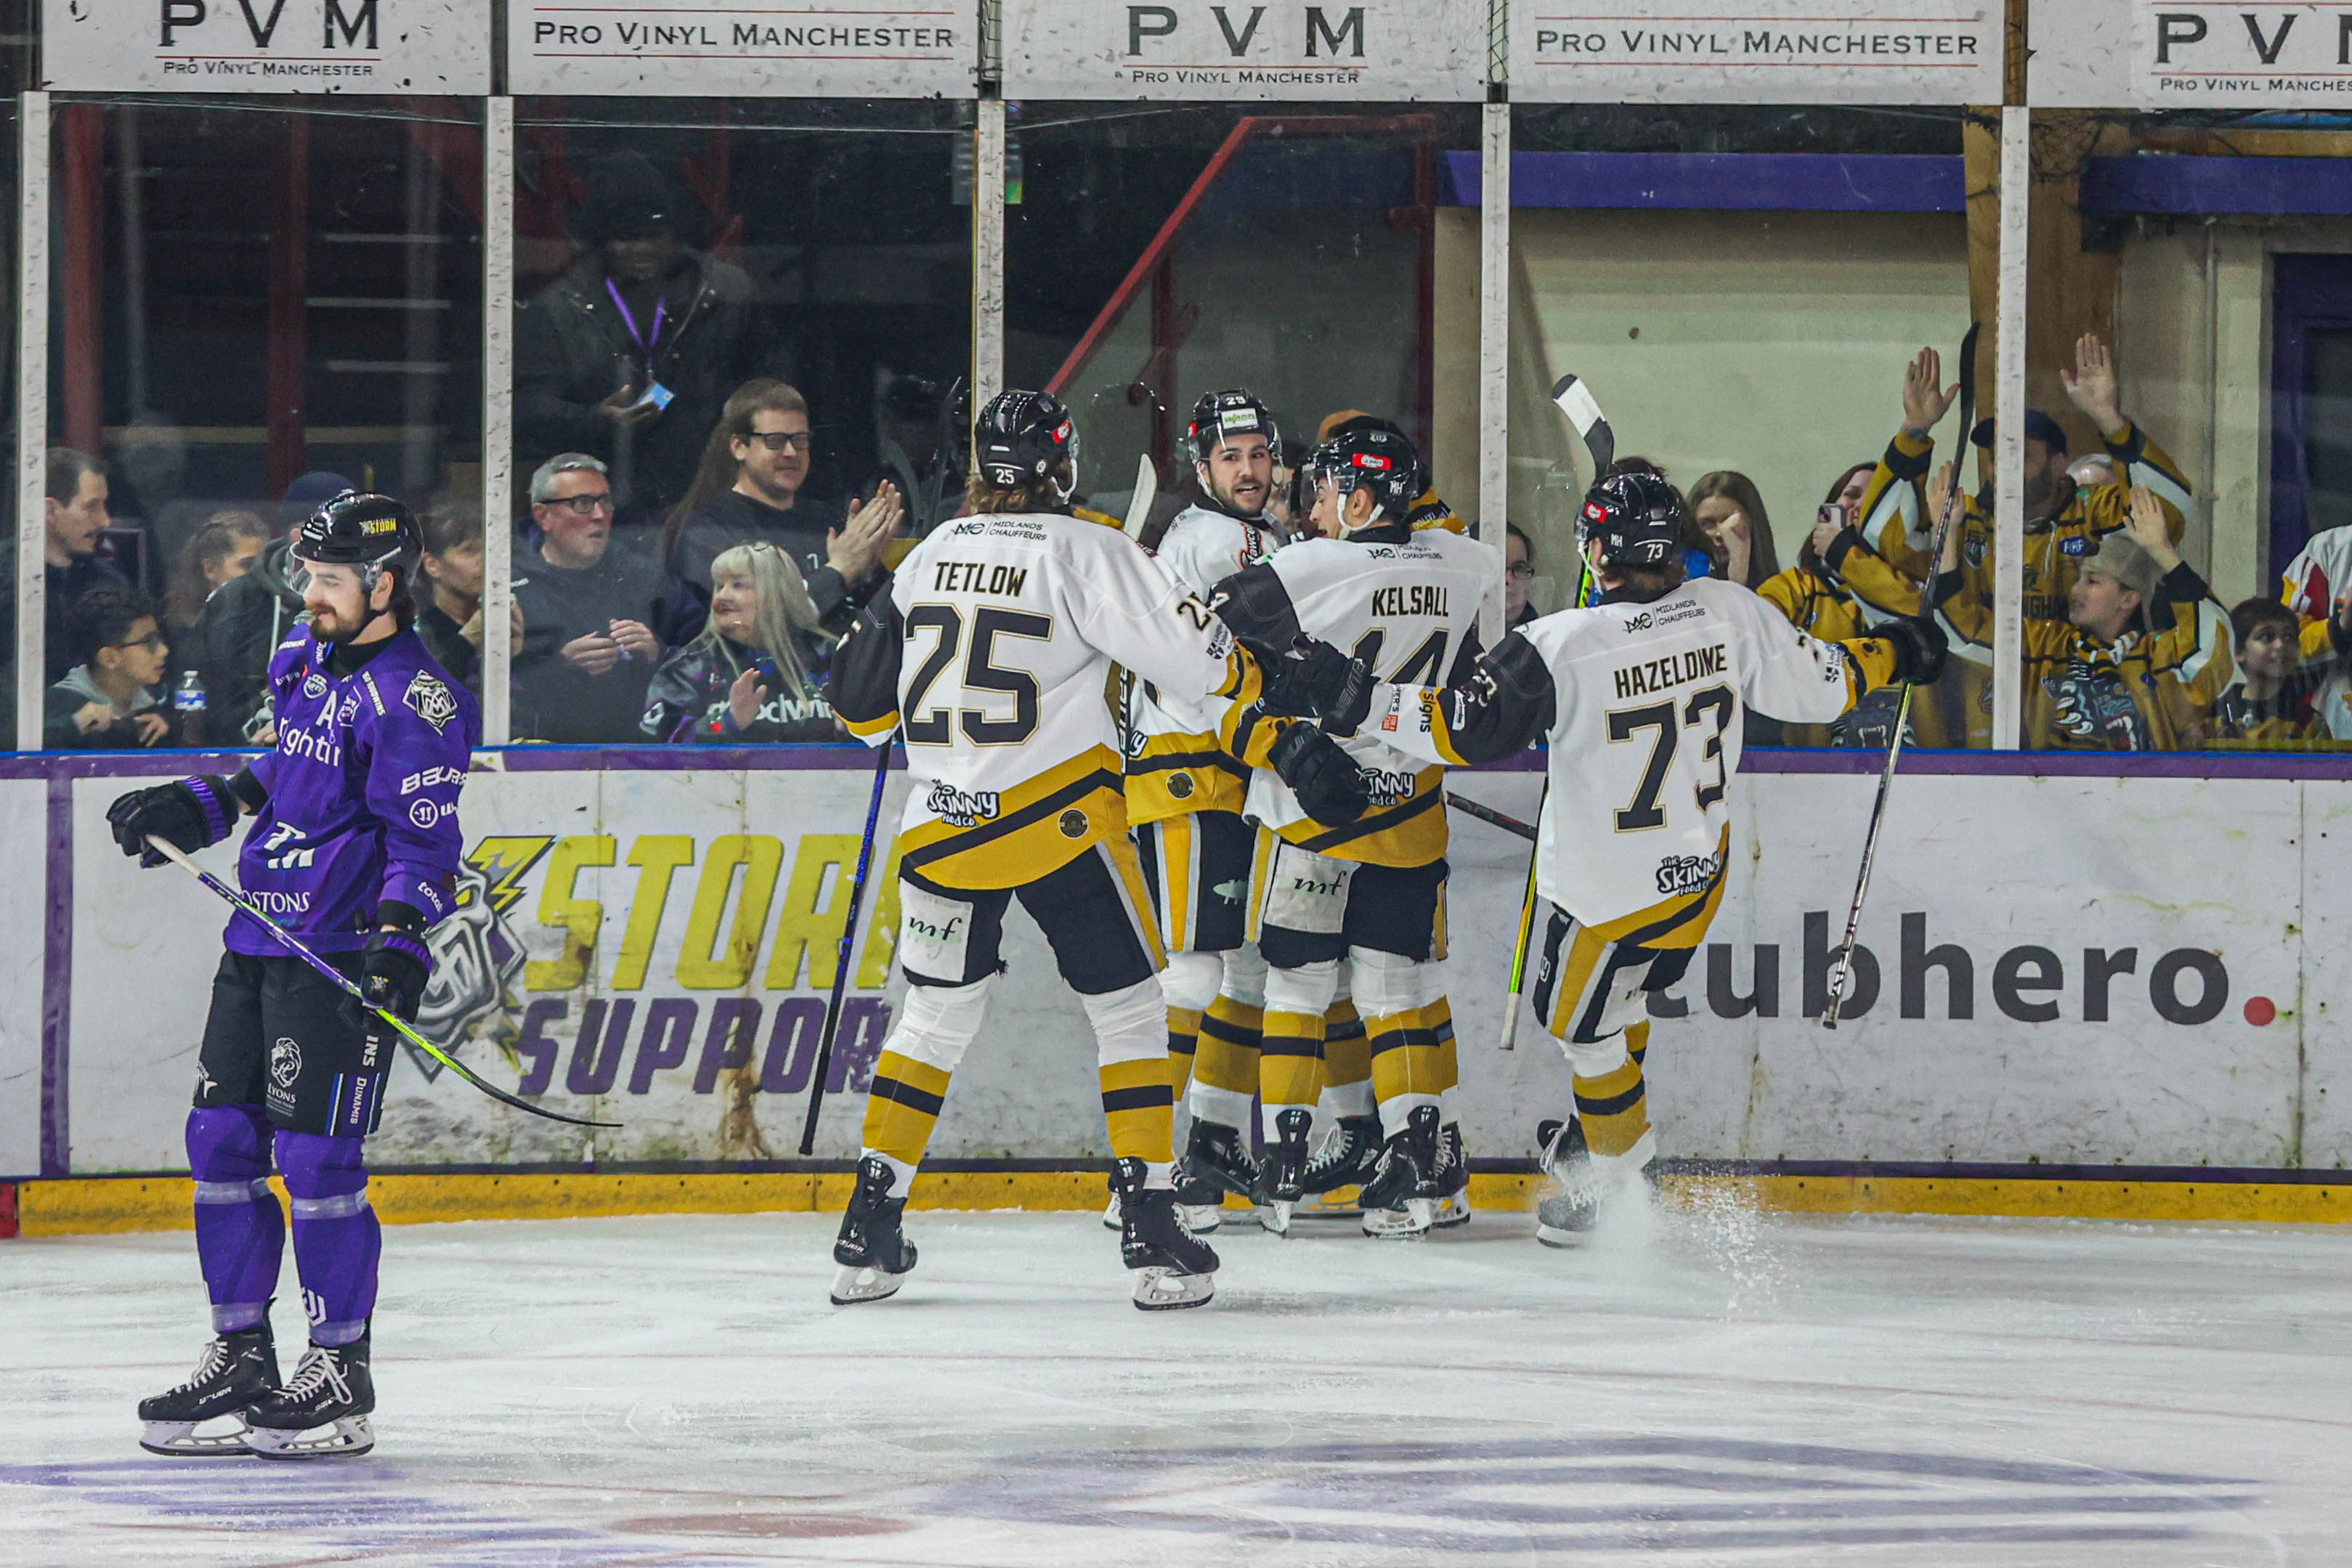 PANTHERS STORM TO VICTORY TO KEEP PLAYOFF DREAM ALIVE Top Image